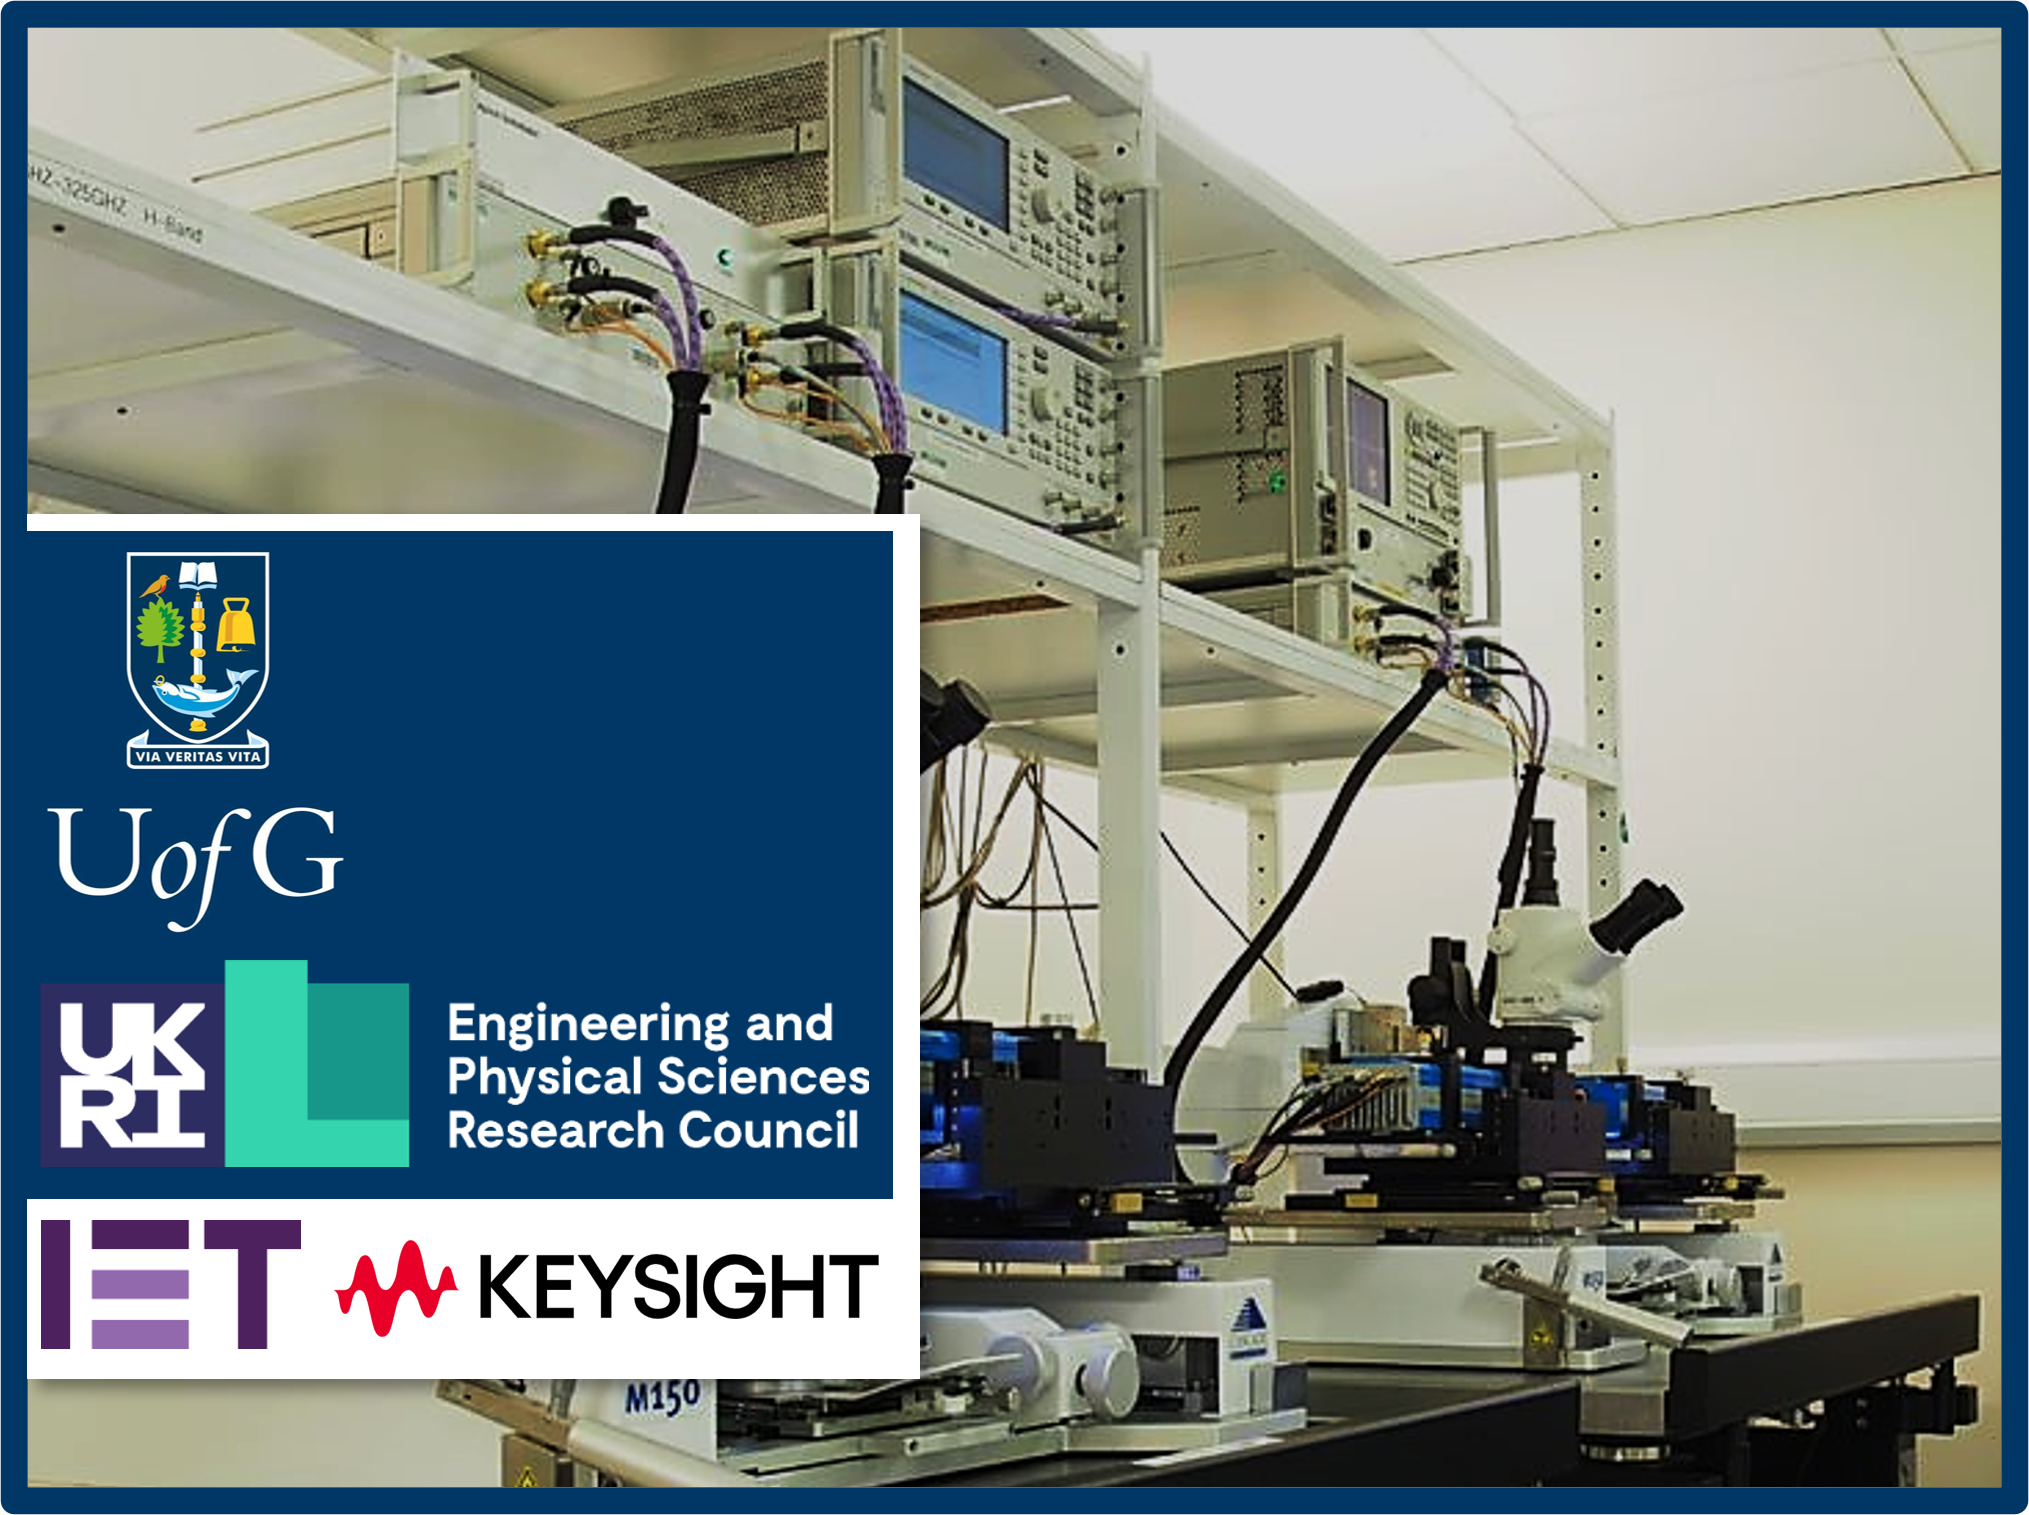 Microwave lab with logos, Keysight, IET, and the University of Glasgow